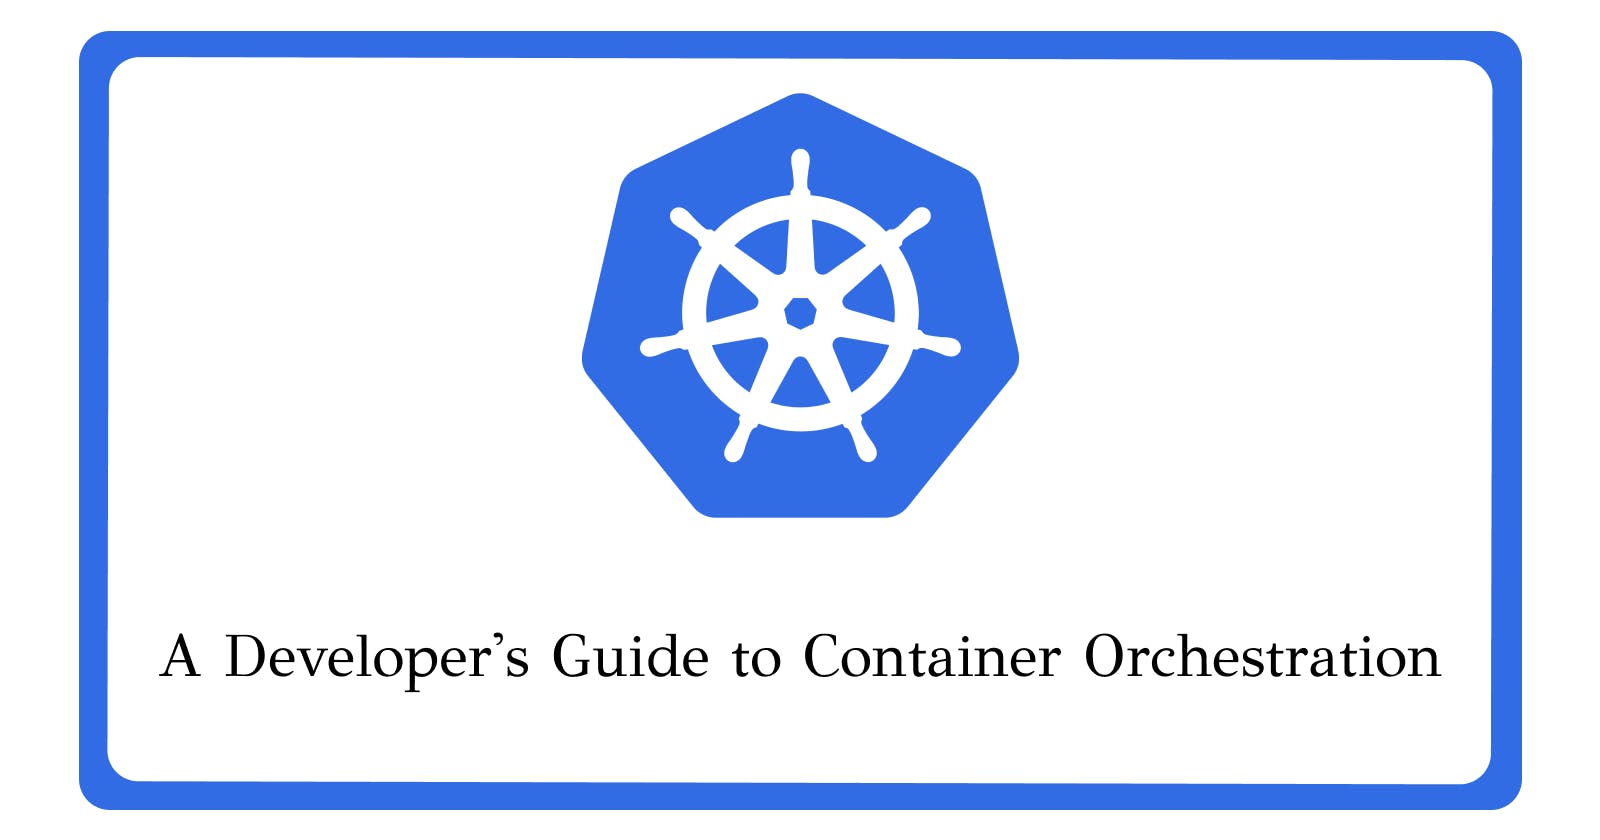 Day 30: Exploring Kubernetes and Its Architectural Design